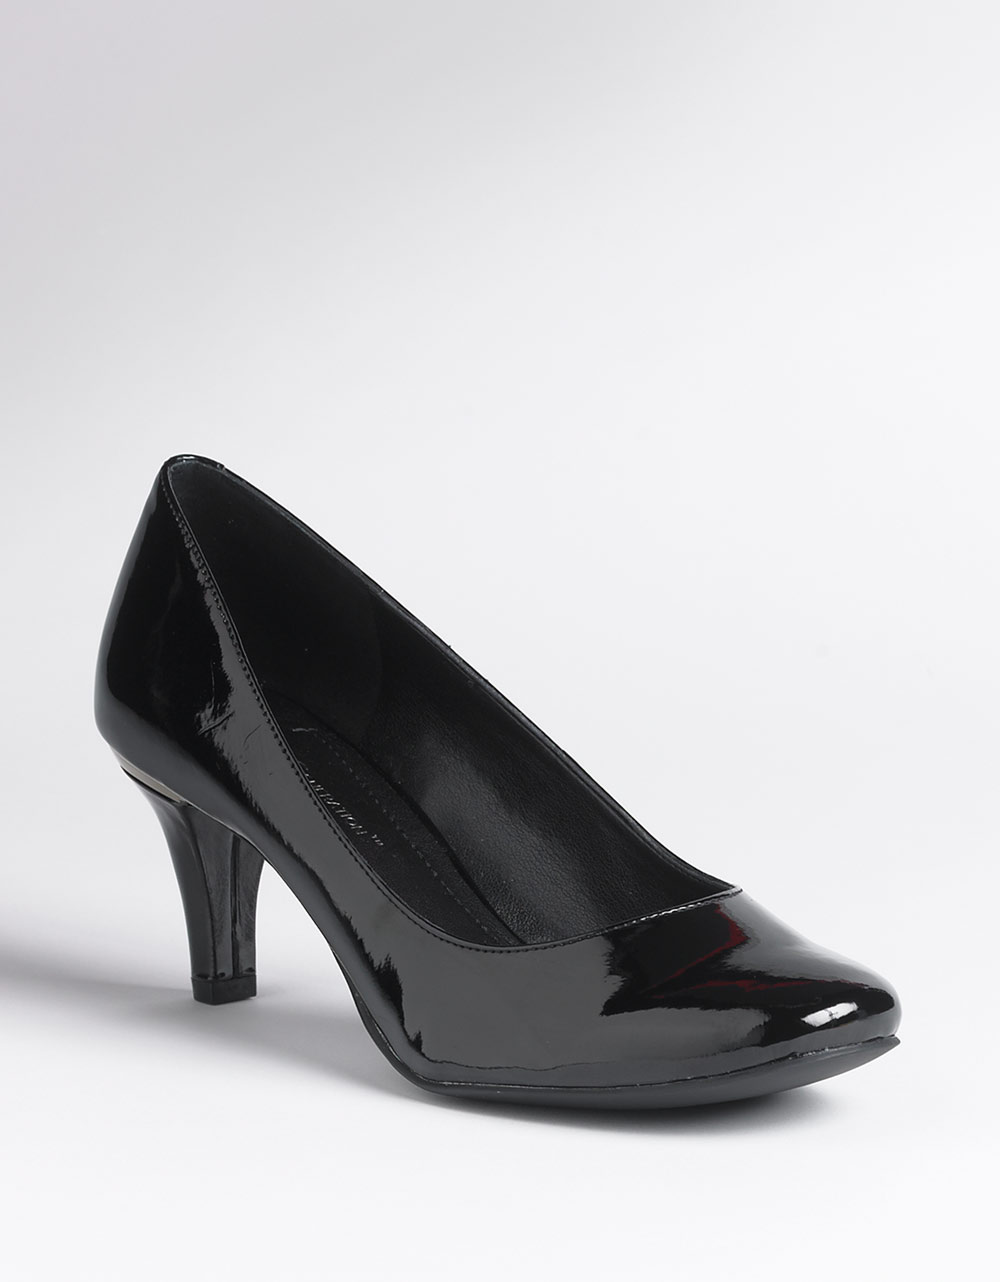 Bcbgeneration Gumby Leather Pumps in Black (black 02) | Lyst